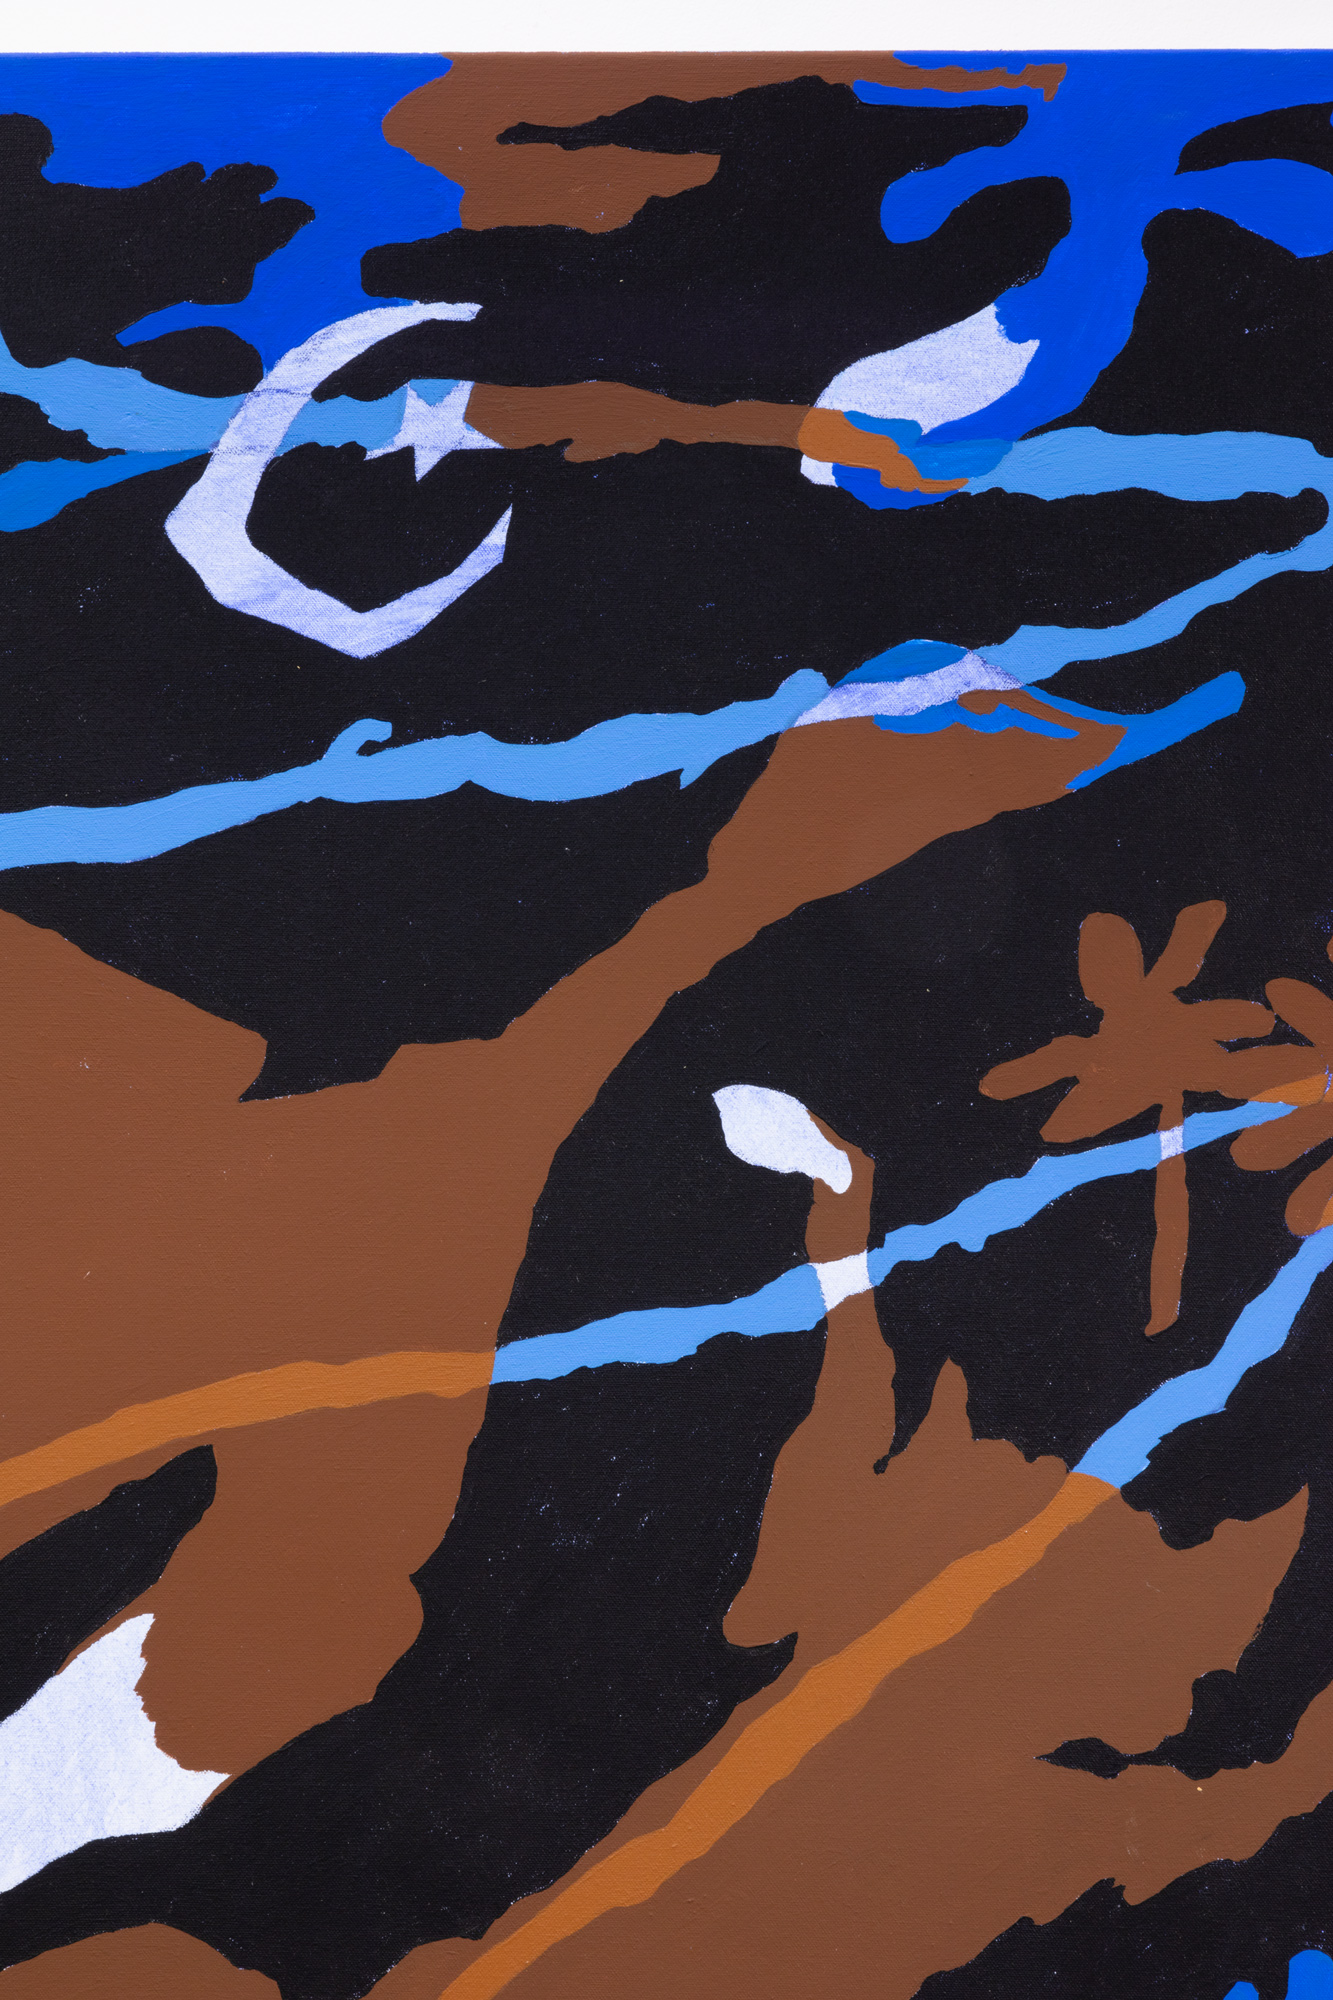  Les Ramsay,  The Mystery of the Midnight Moodies , 2019. Acrylic on canvas, 72 x 54 in (183 x 137 cm) 